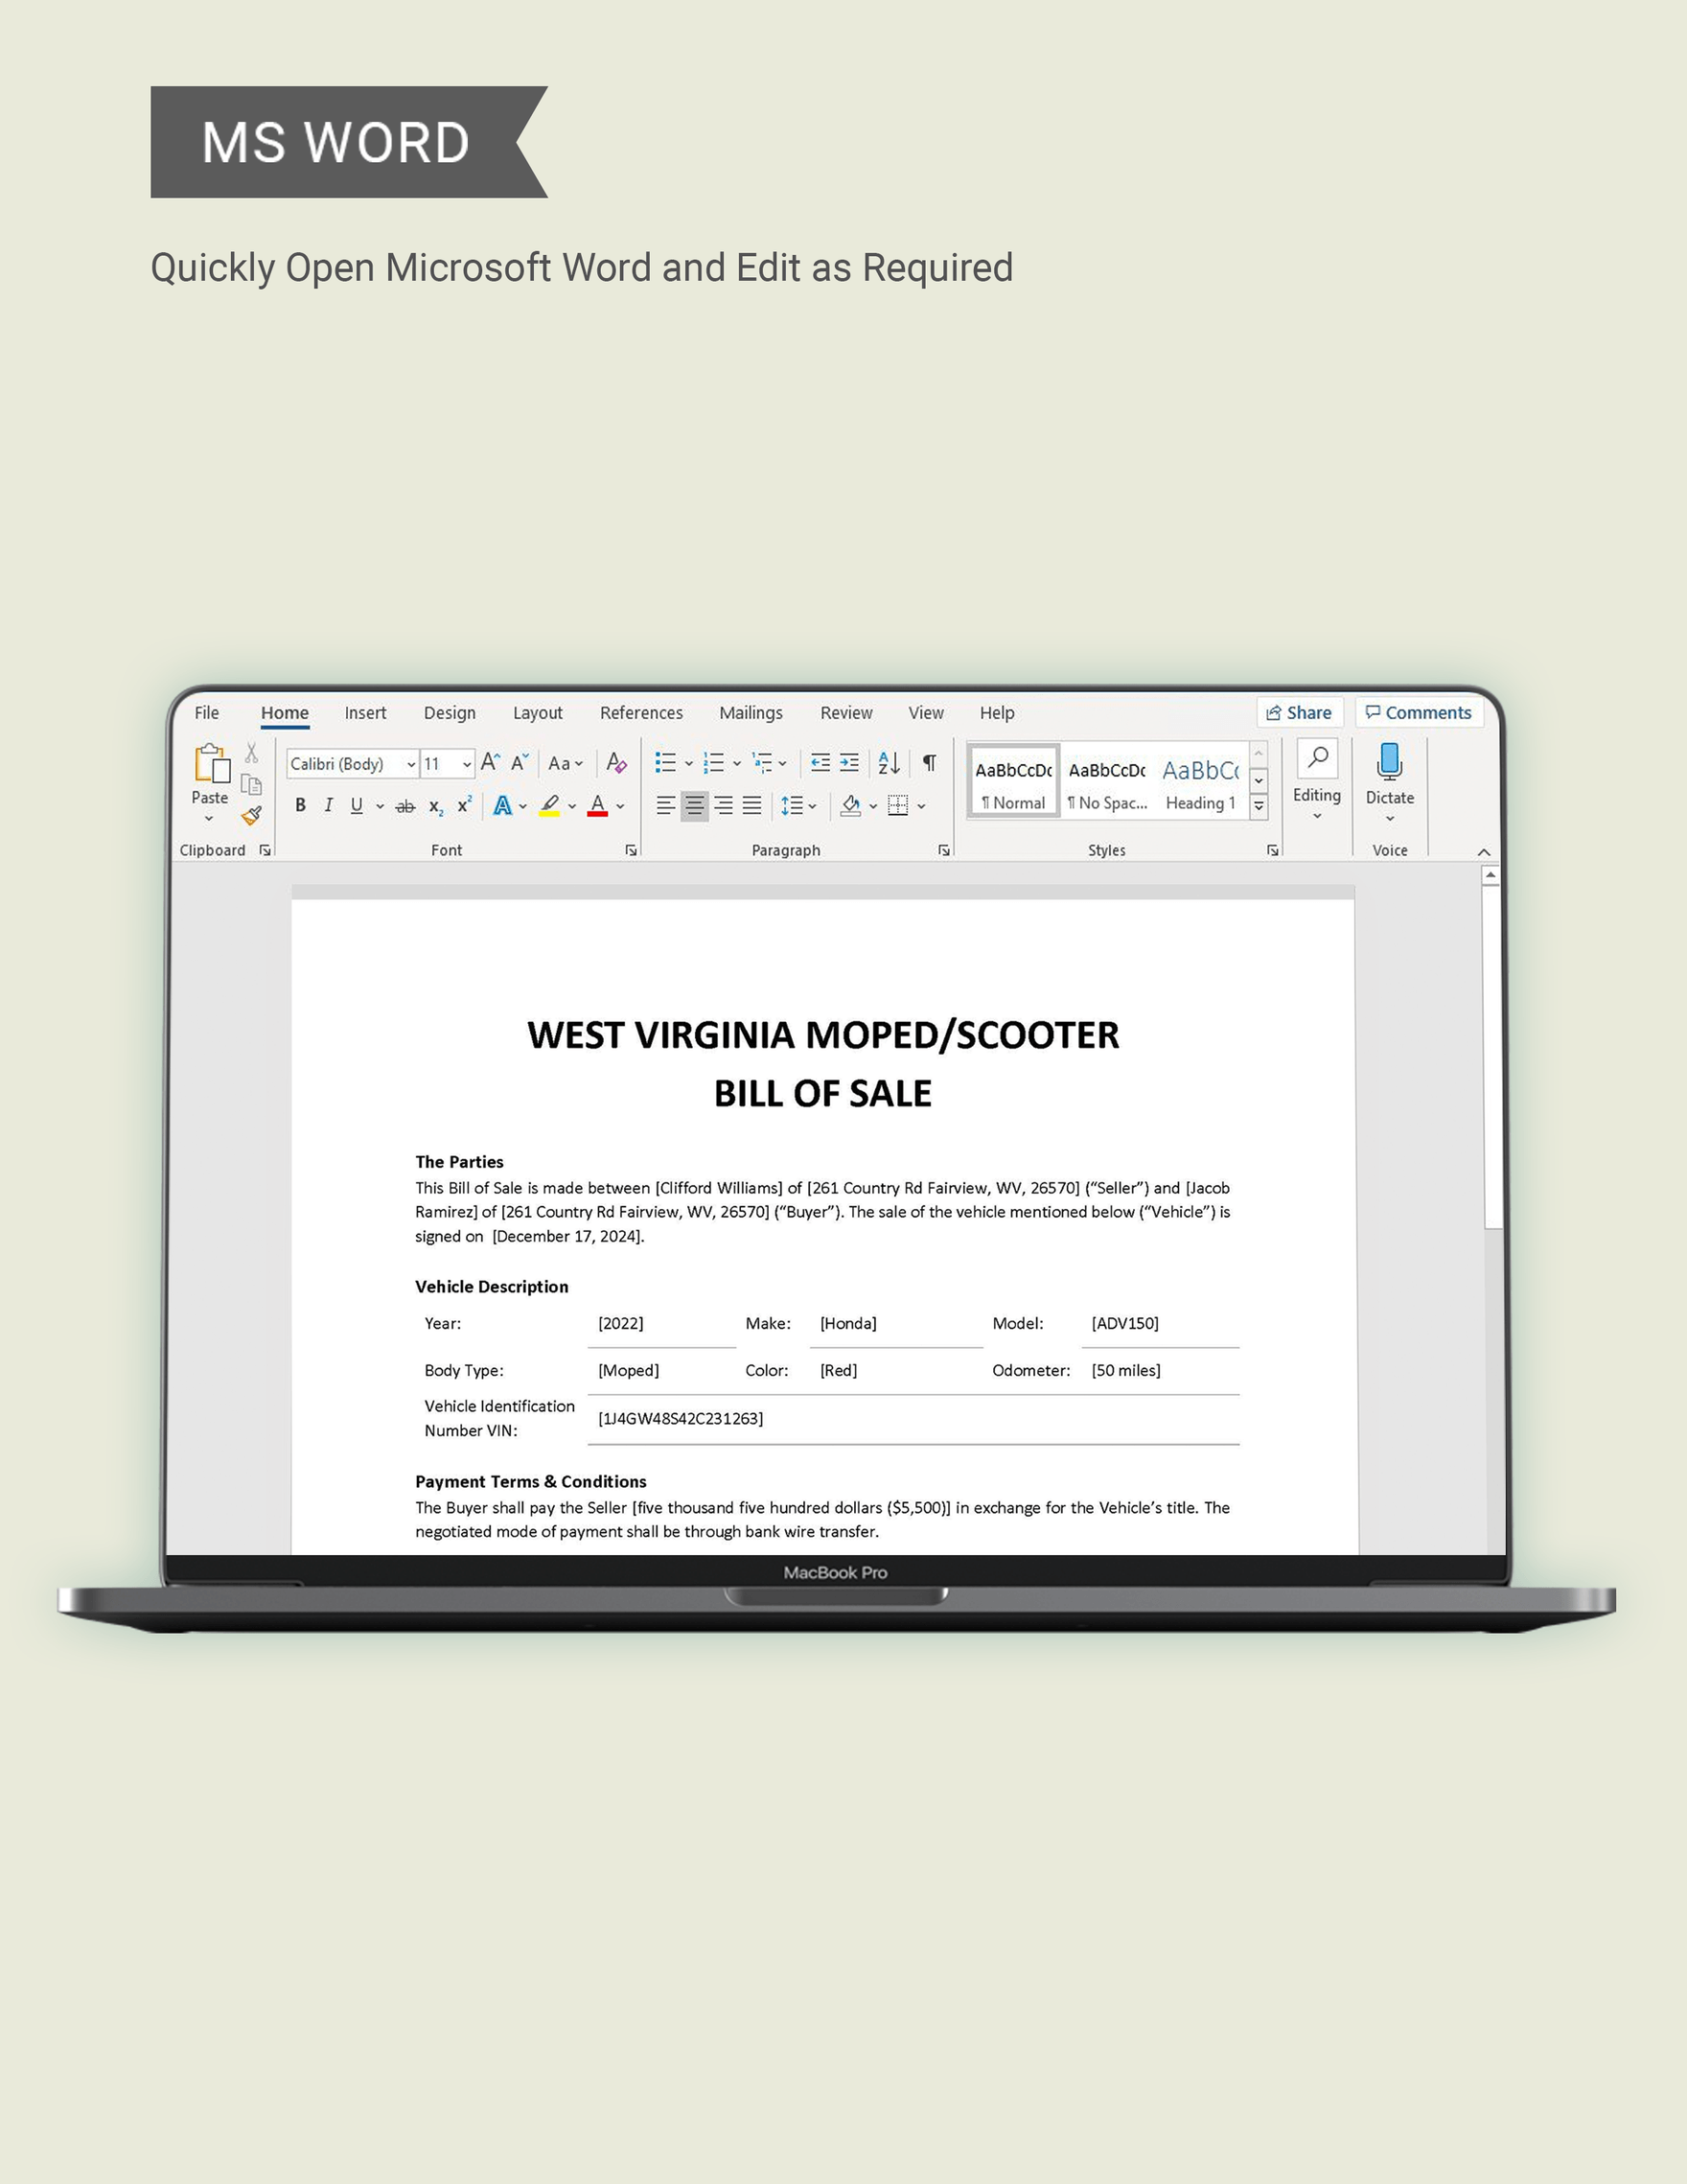 West Virginia Moped / Scooter Bill of Sale Template